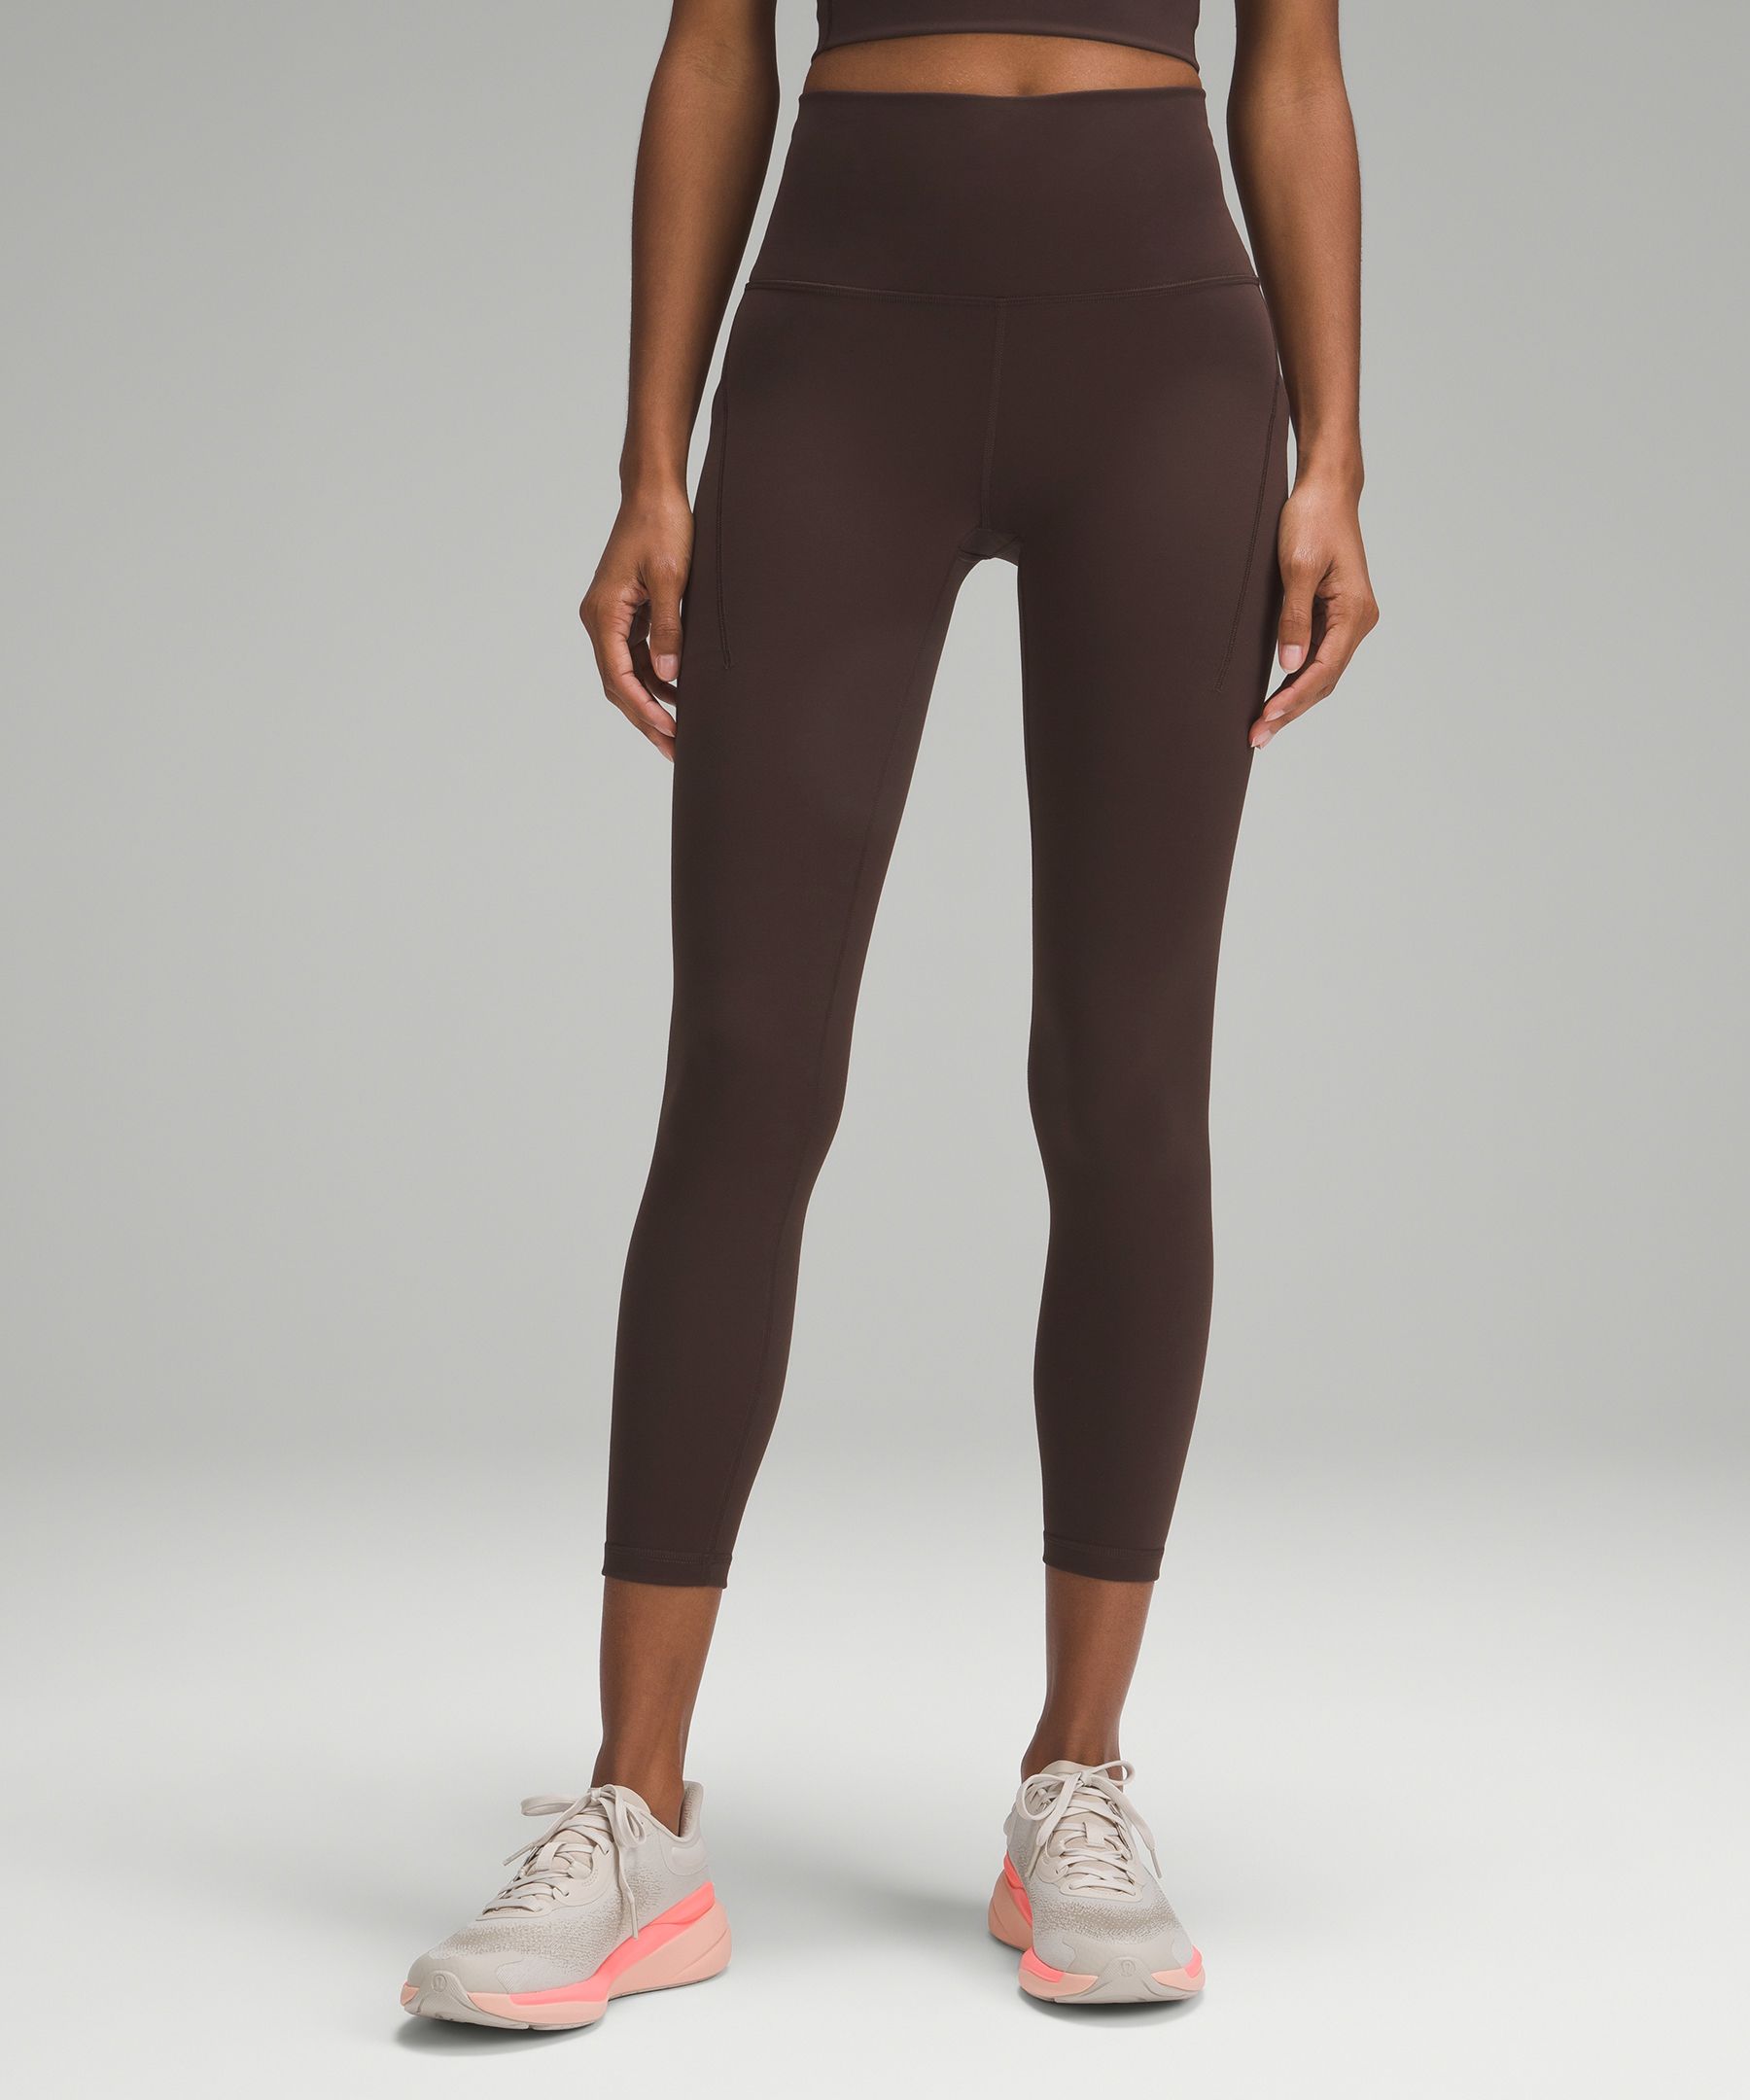 Lululemon Wunder Train High-rise Tight With Pockets 25"